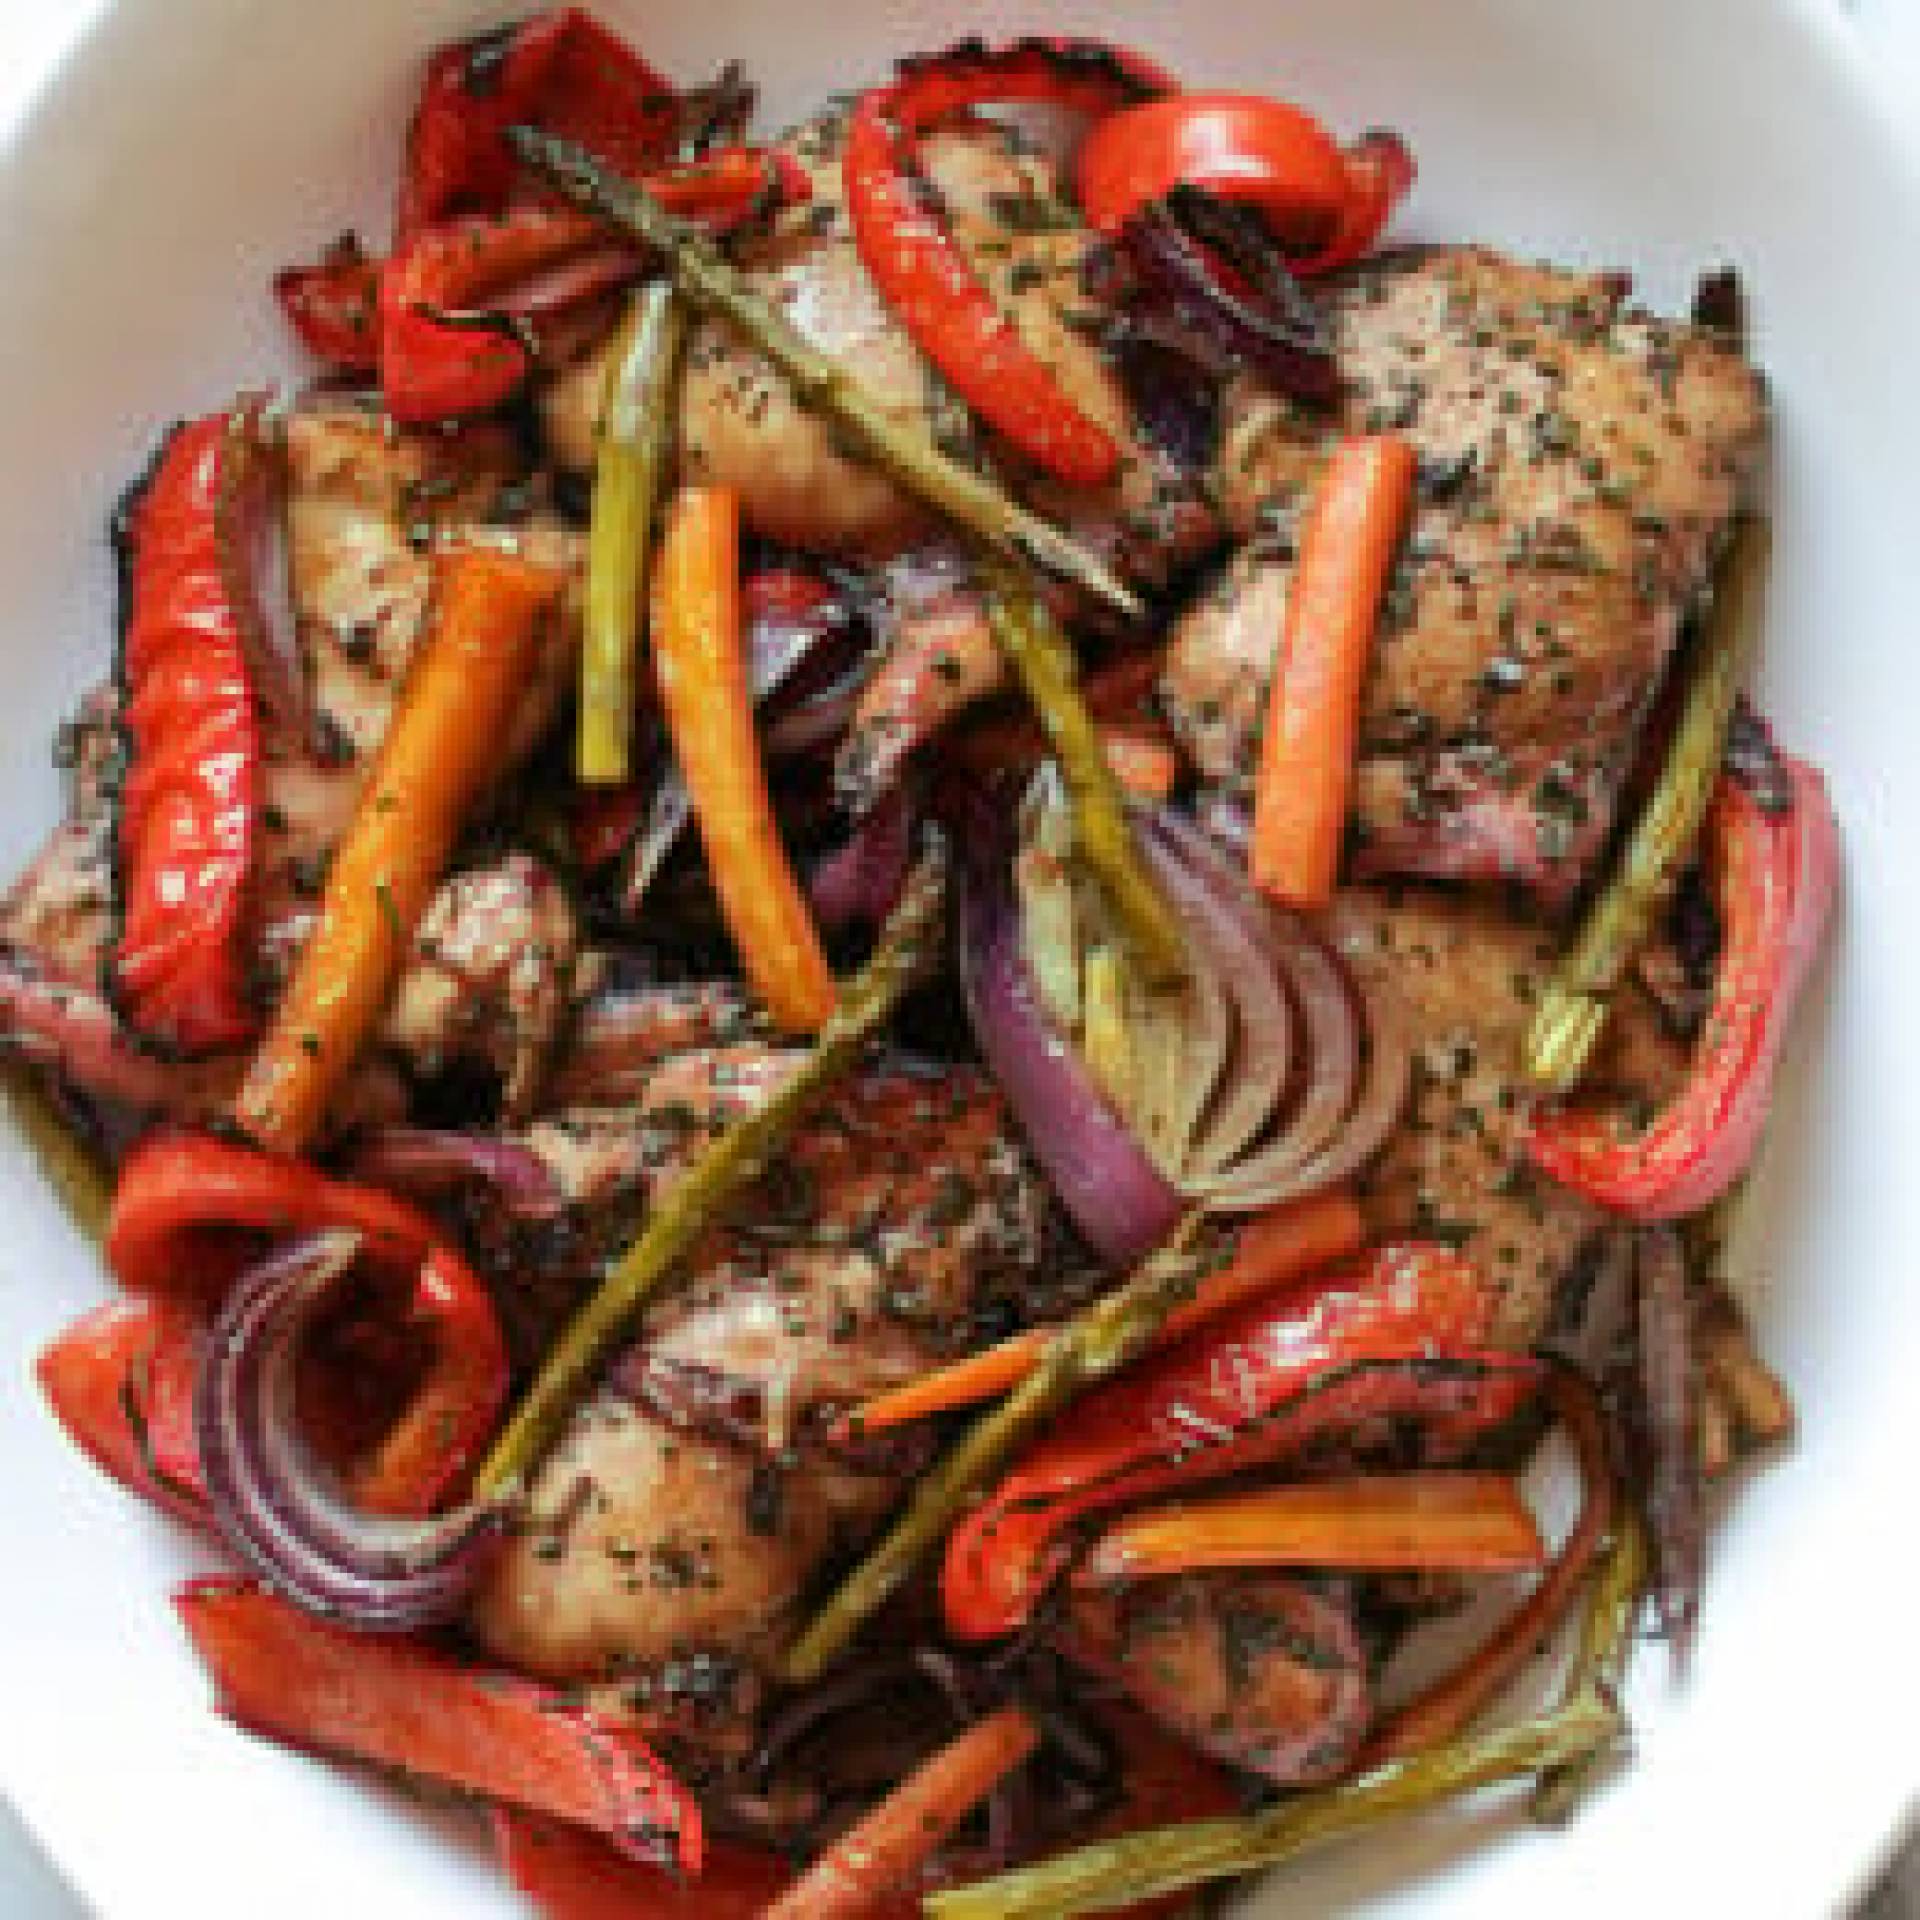 Balsamic Chicken Thighs with Roasted Vegetables